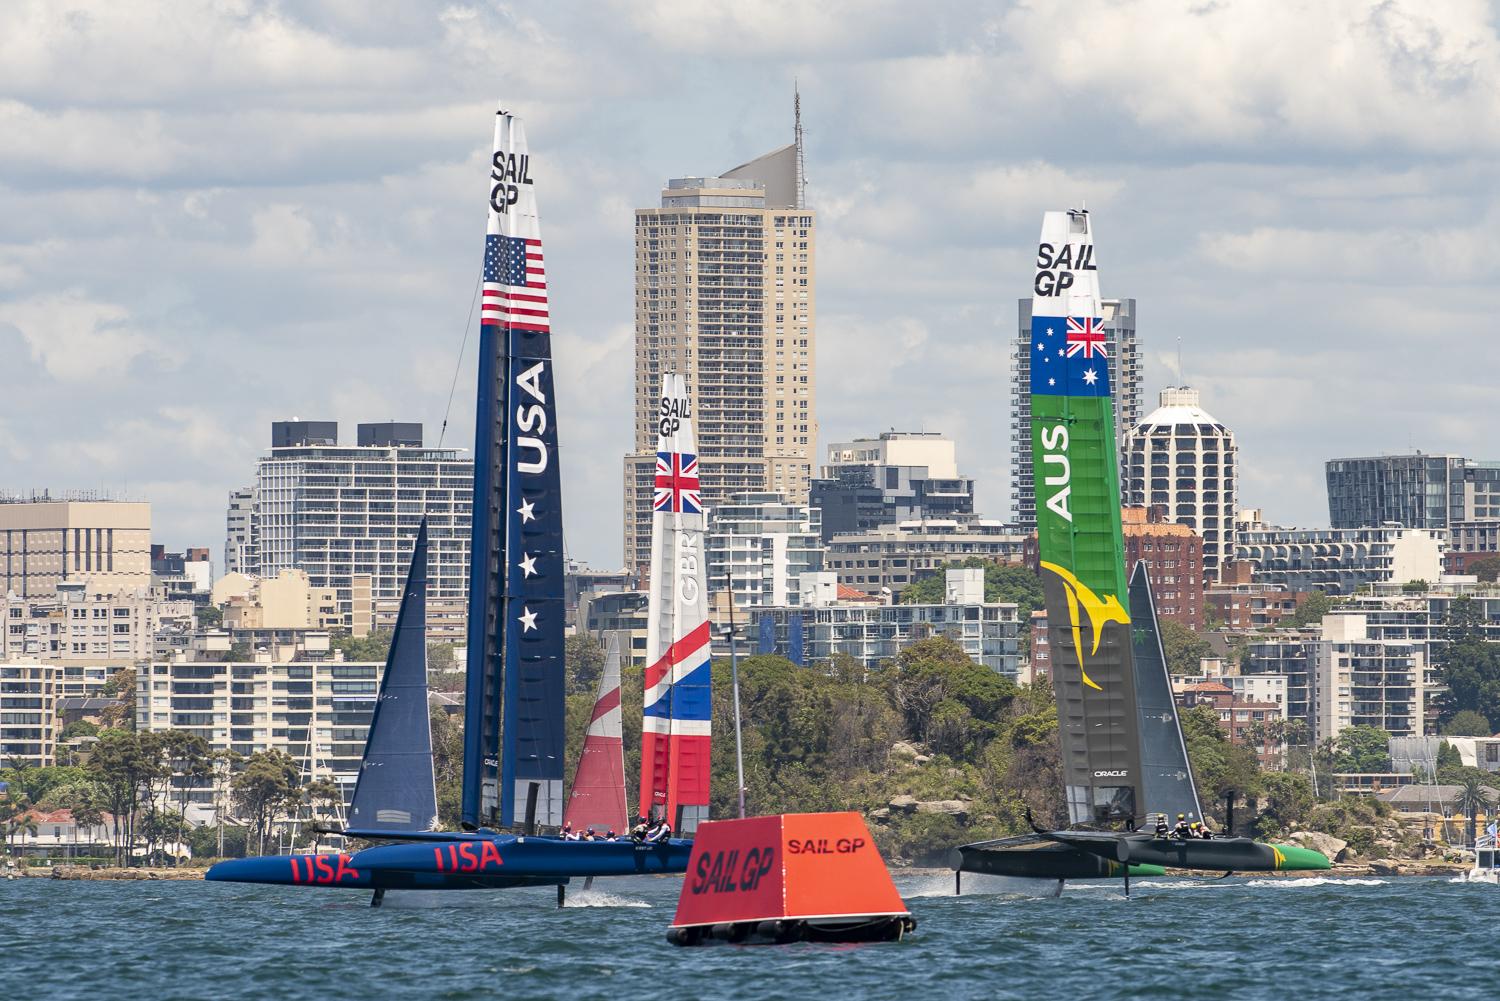 SailGP announces extensive global coverage ahead of first event in Sydney